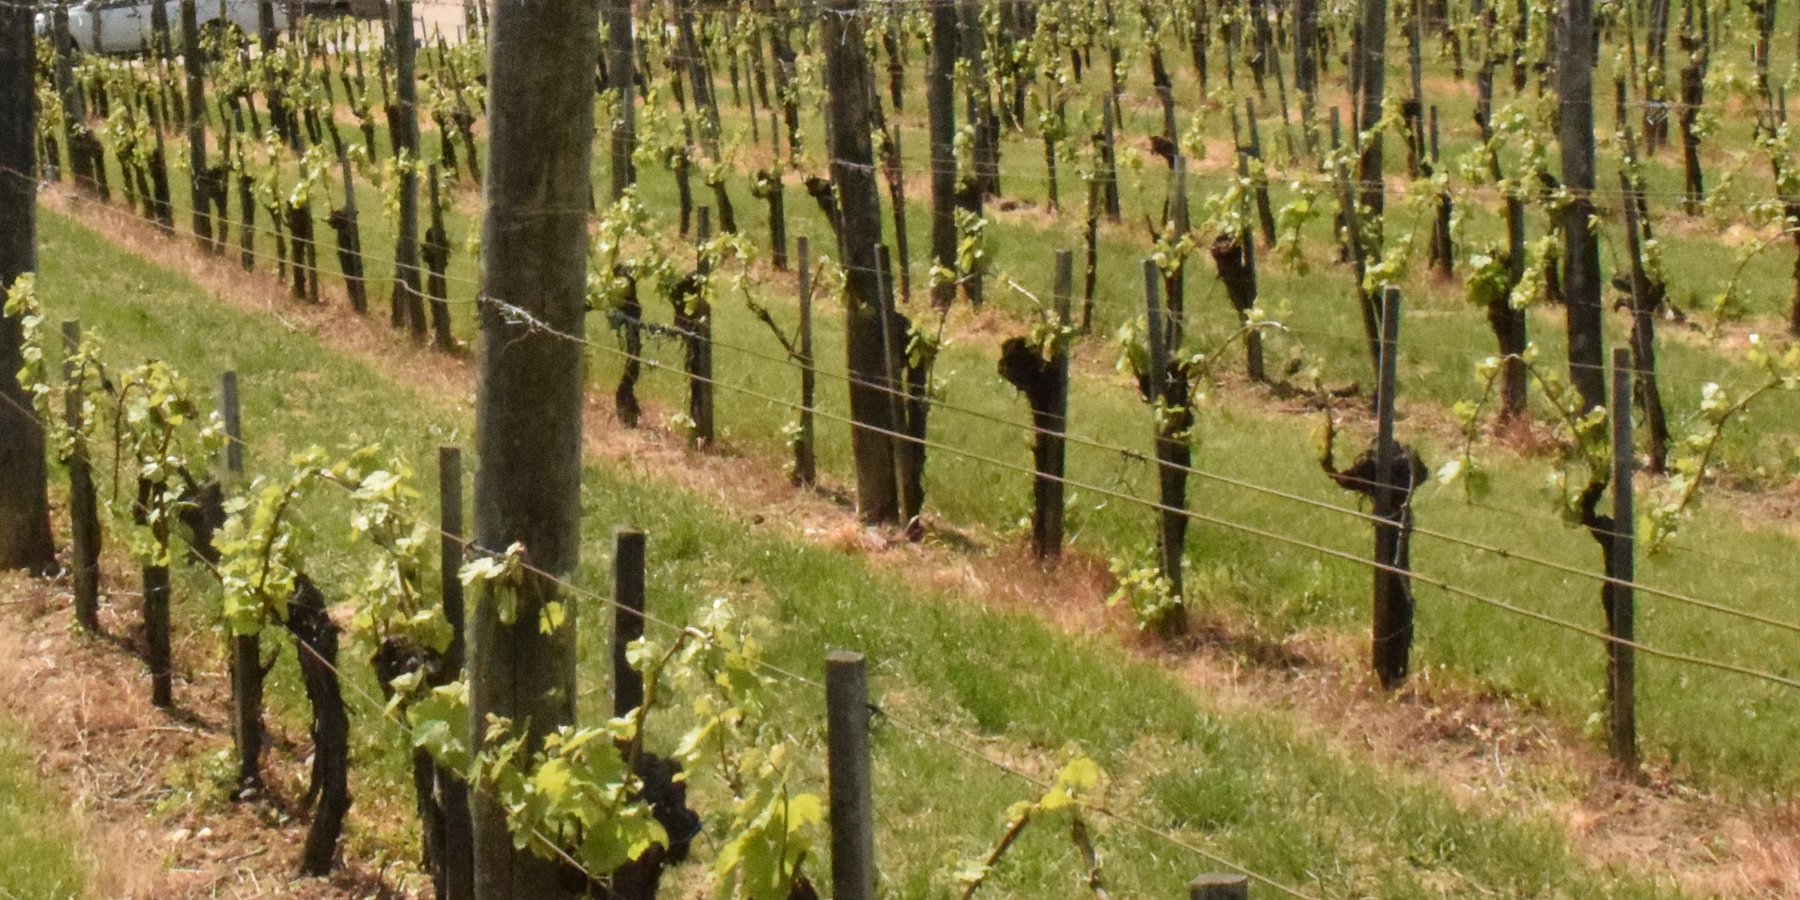 Permanent grass covers the soil surface in vineyards